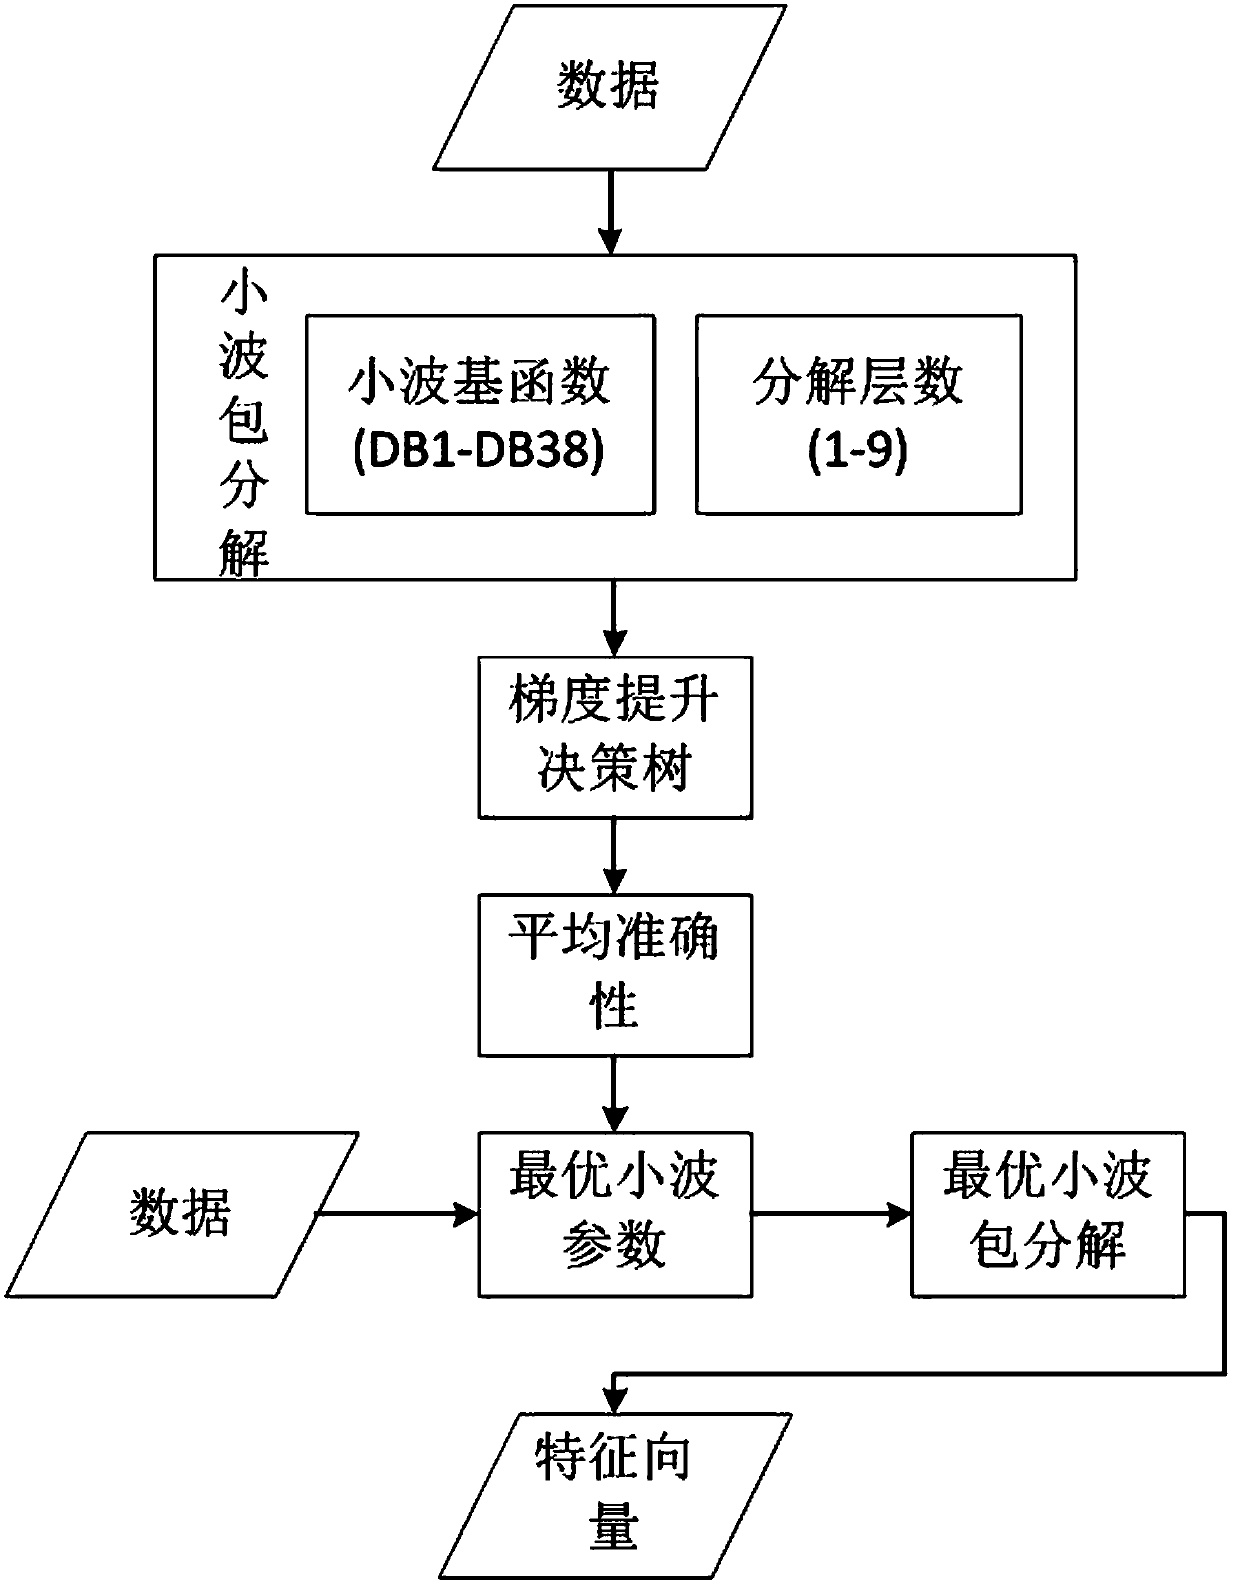 Traction converter fault diagnosis method based on gradient improvement decision tree